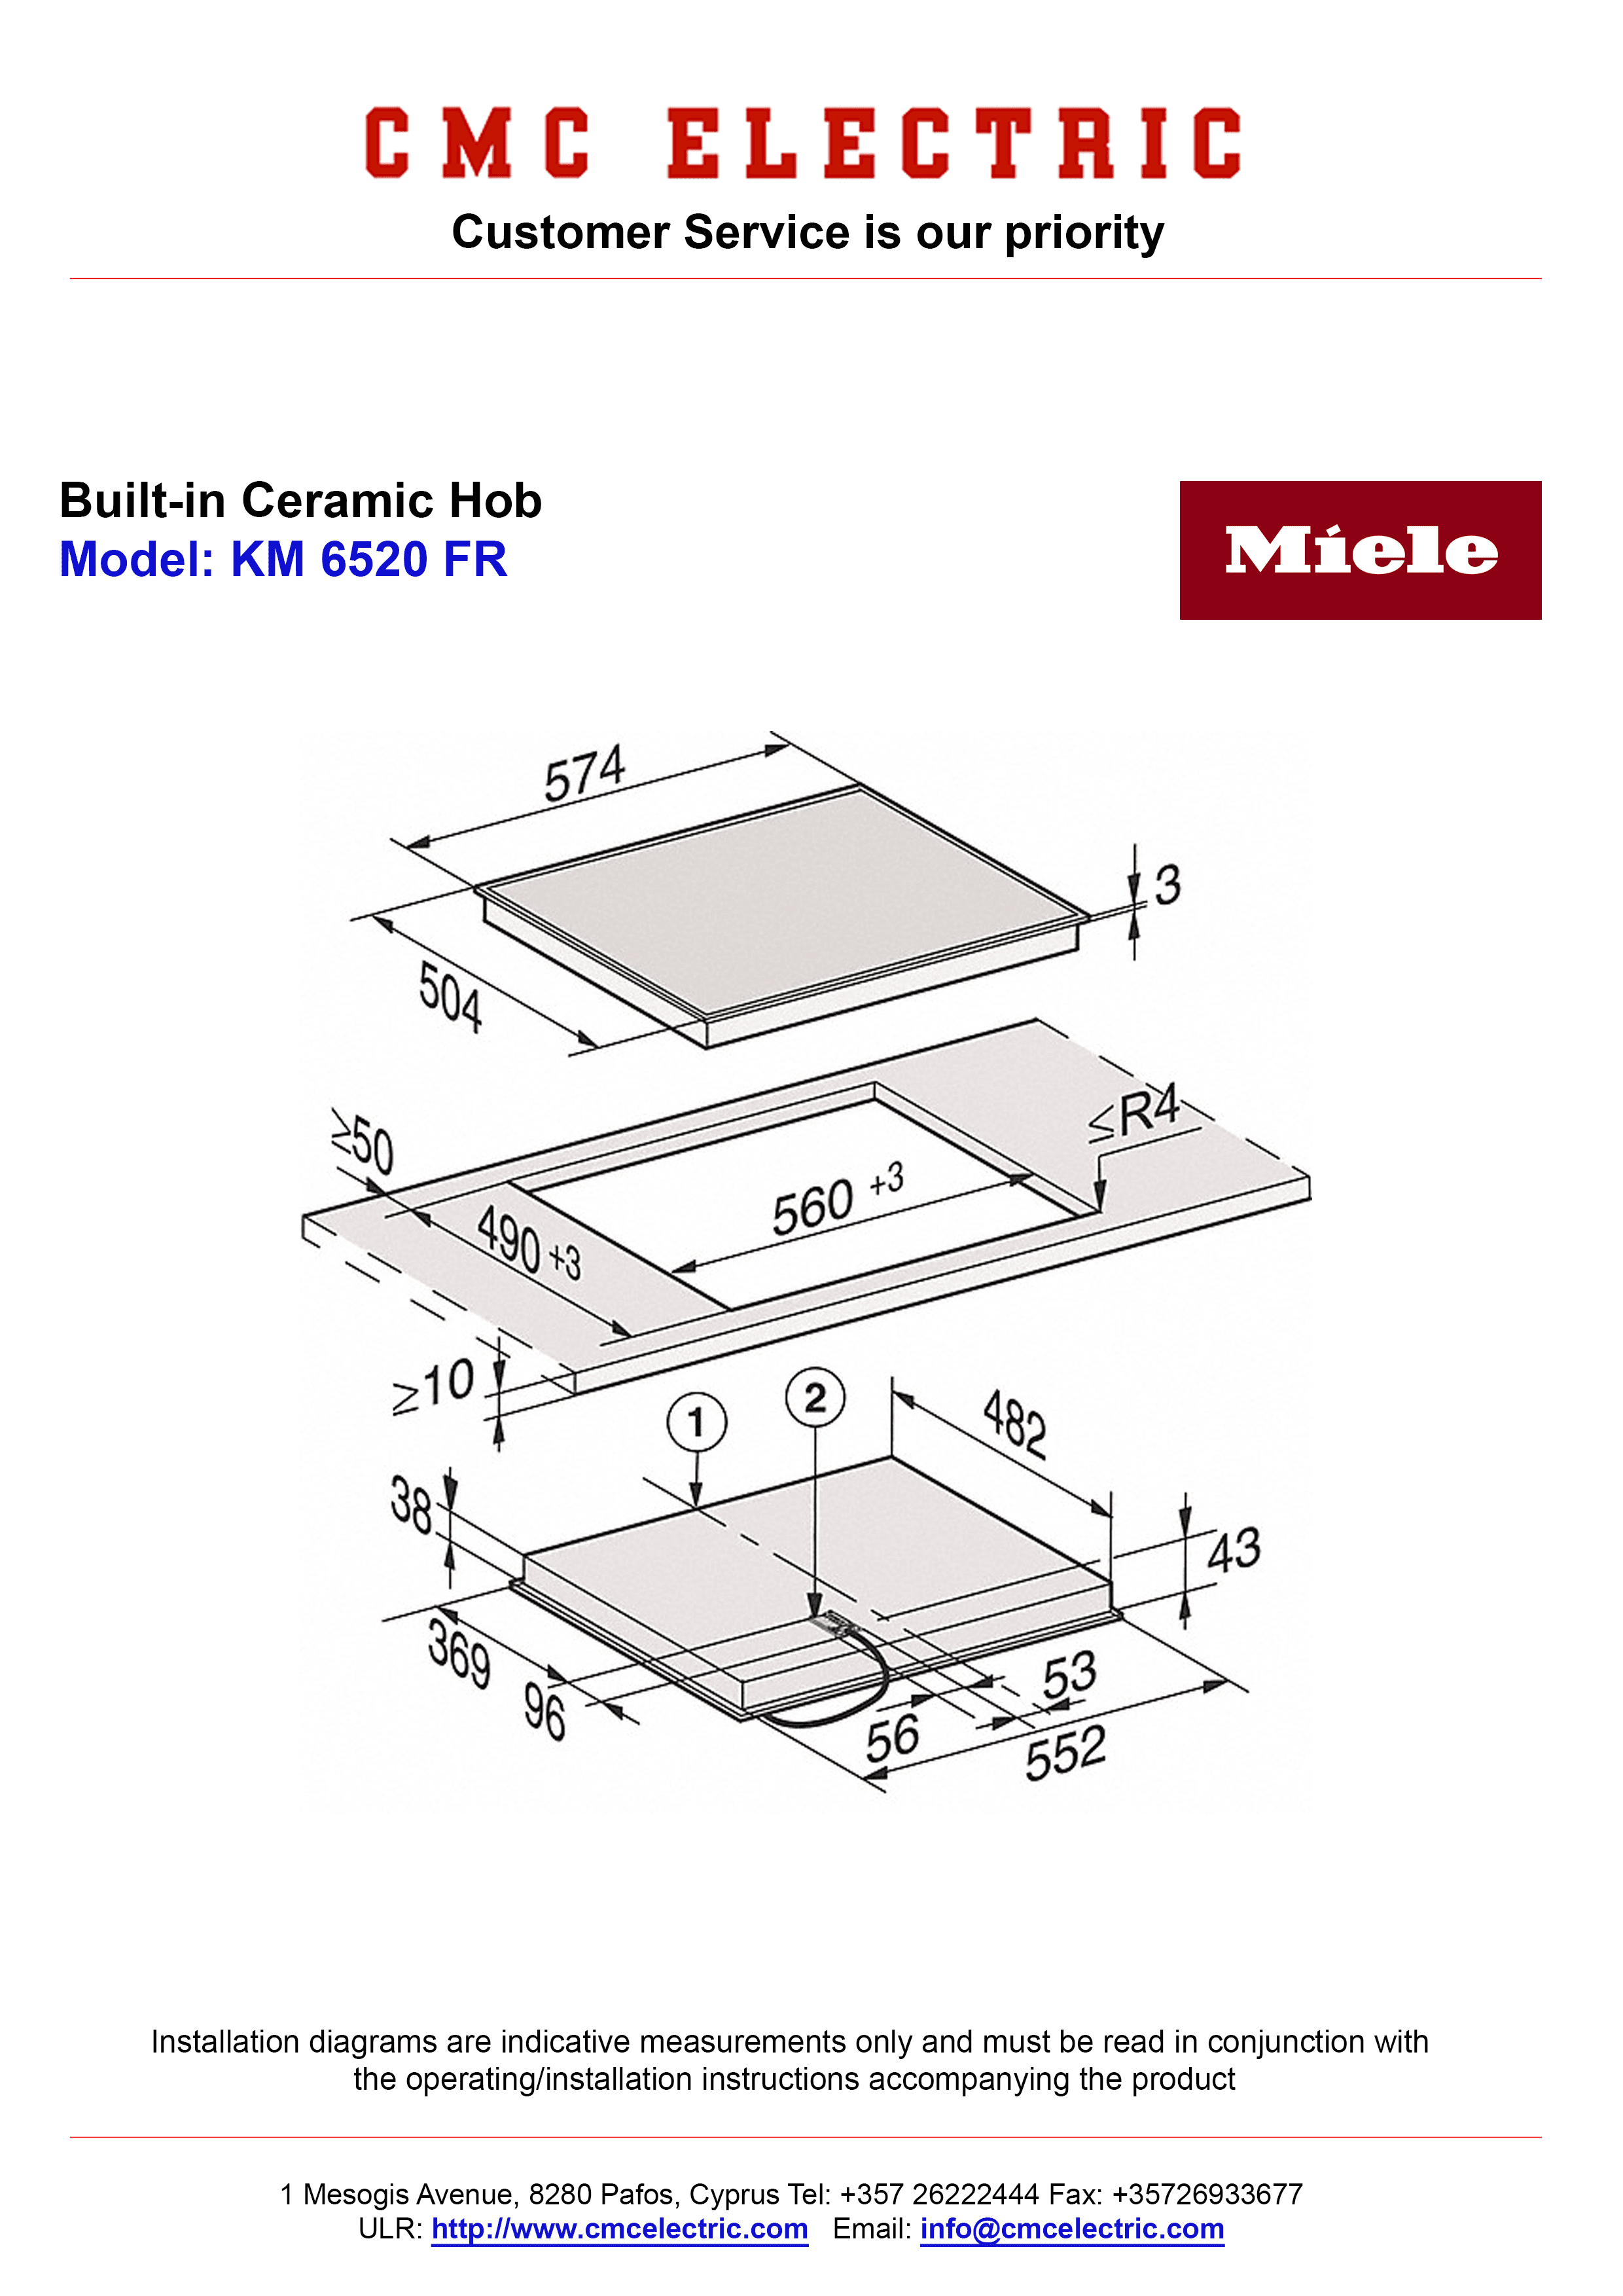 Buy FR CMC Miele Hob KM Cyprus Electrical 6520 Appliances - Electric Ceramic - Built-in in